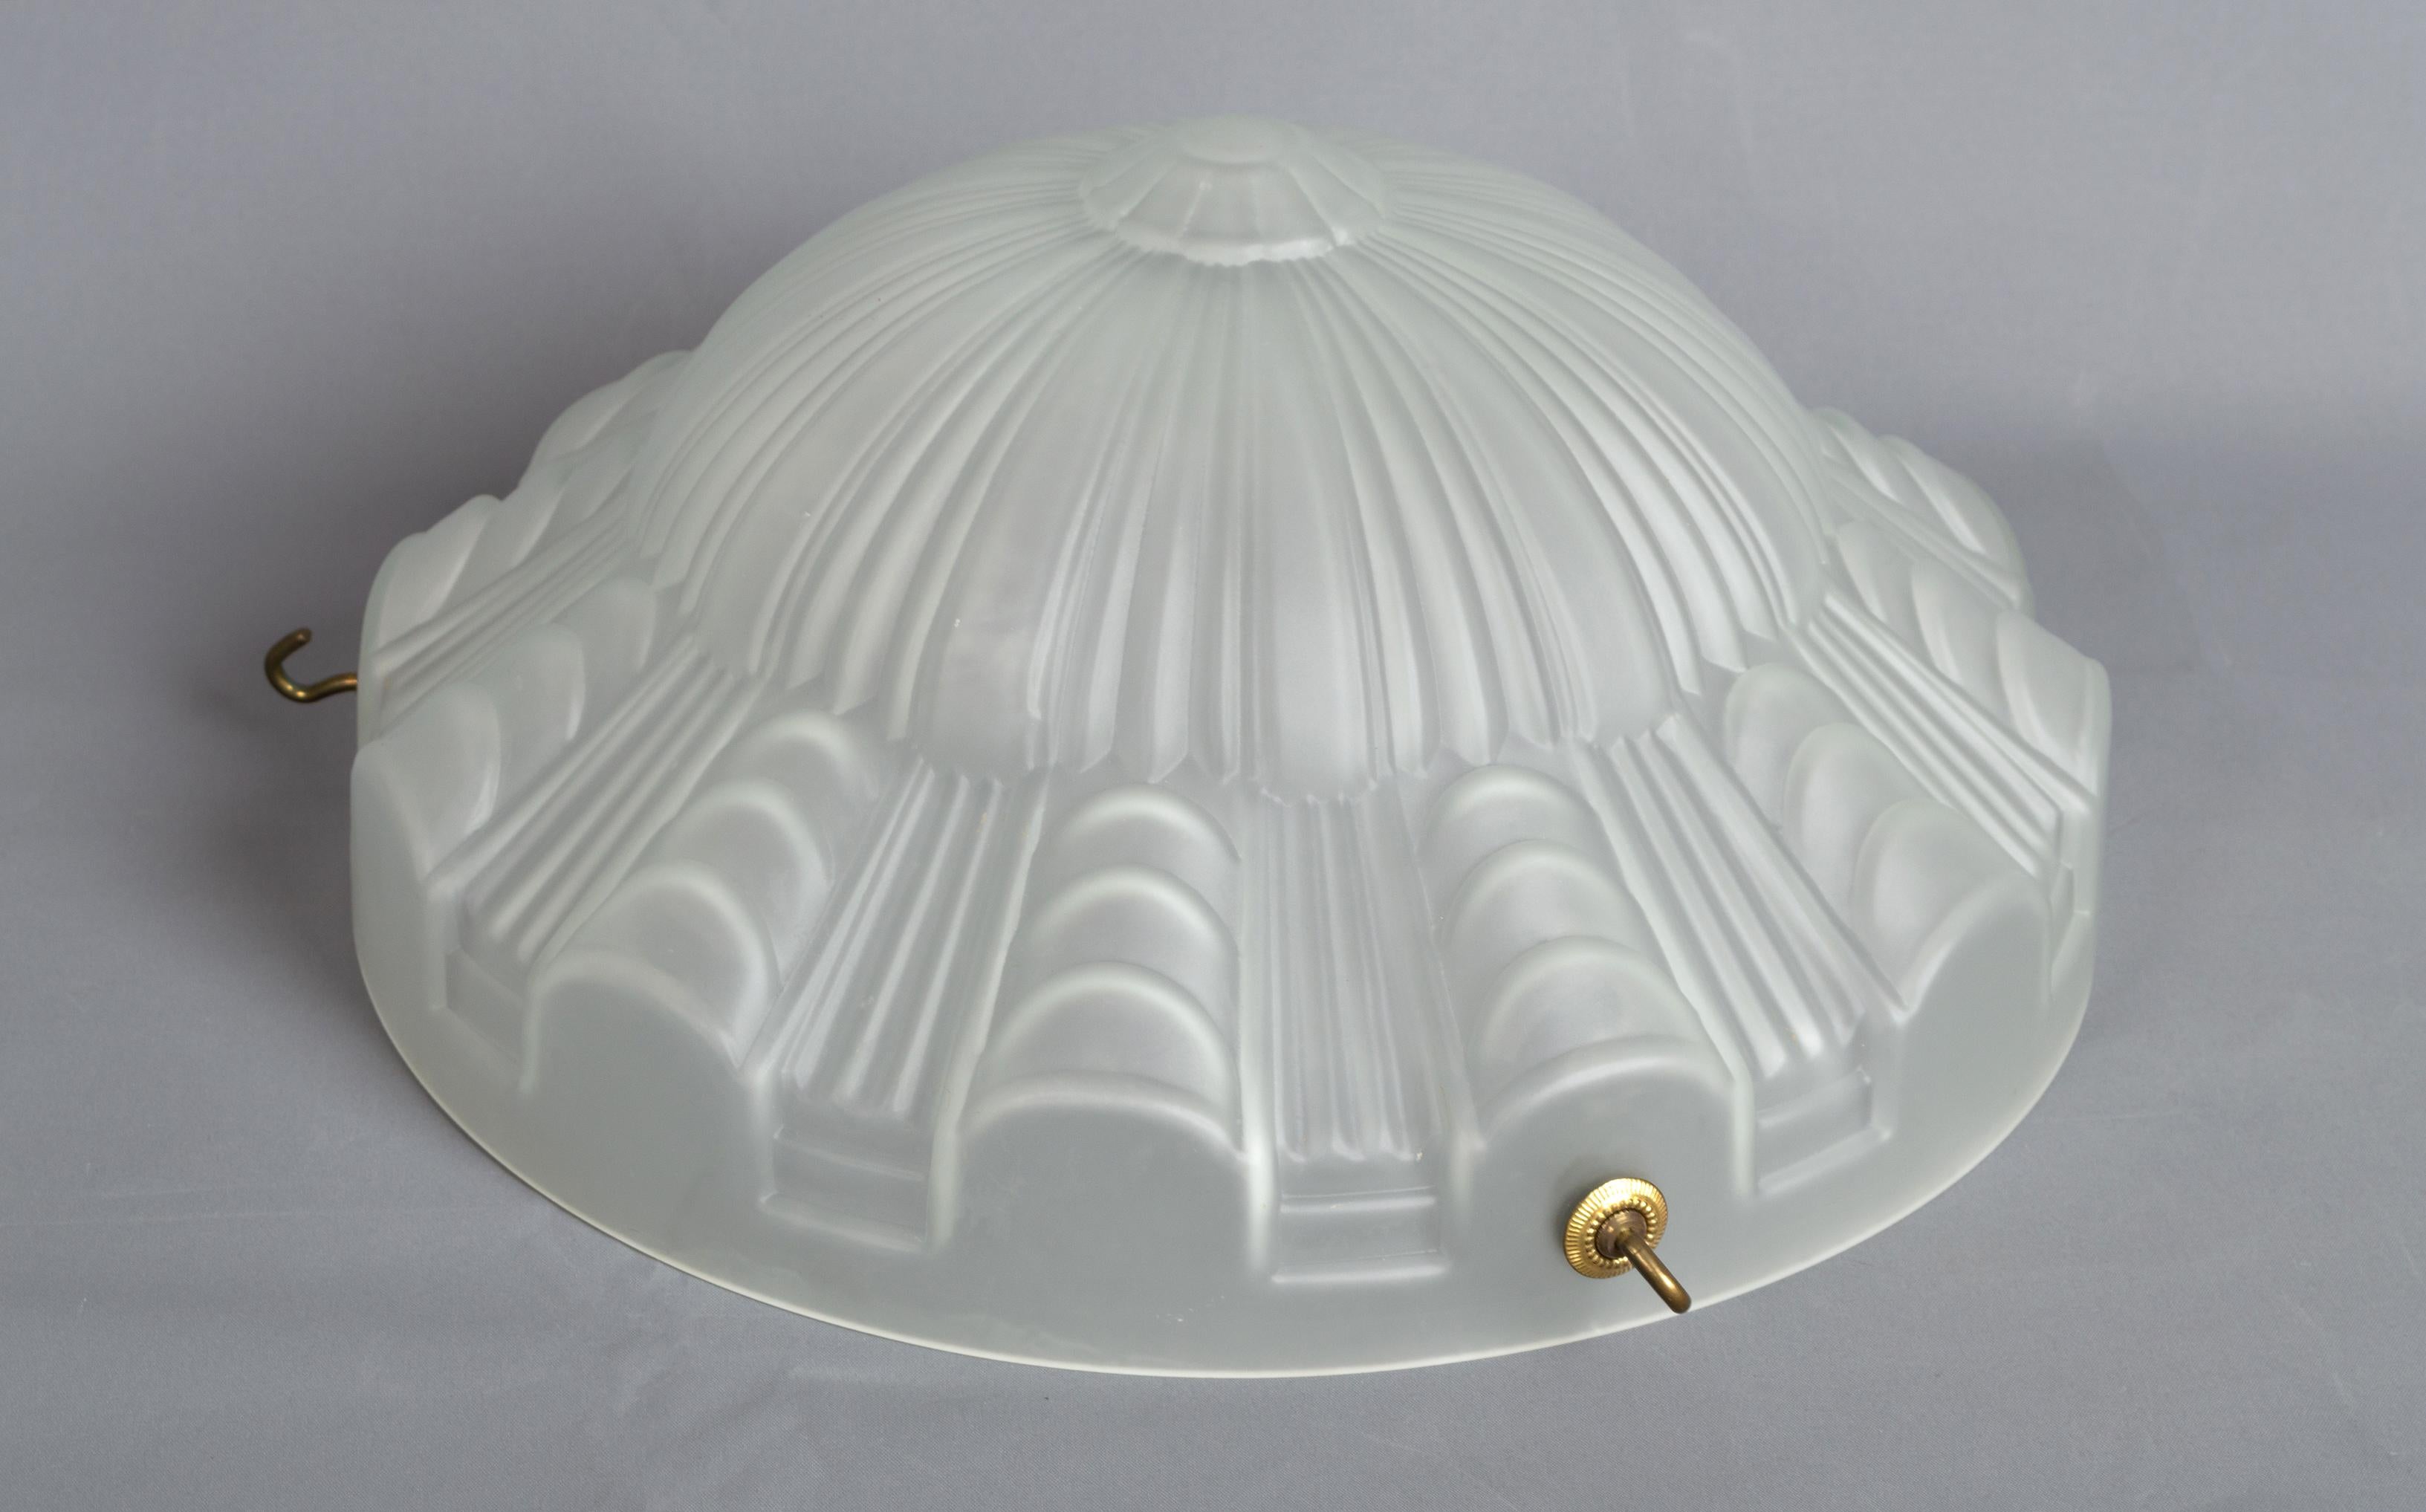 Antique English Art Deco glass plafonnier pendant shade C.1920

In excellent condition commensurate of age.